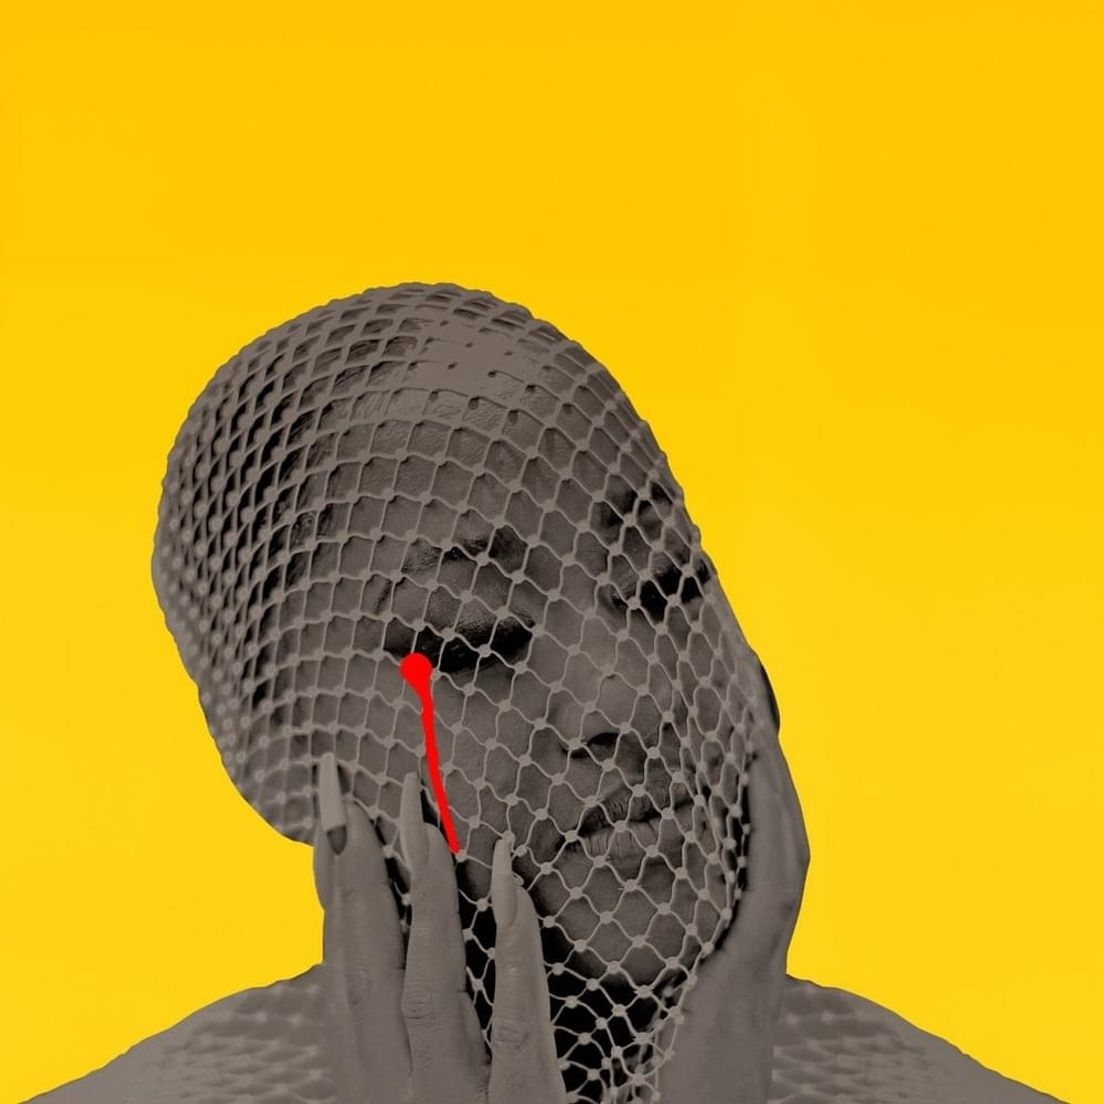 A person is shown in grayscale, holding their face with both hands, and covered by a net-like material. A single red tear is drawn on the left cheek